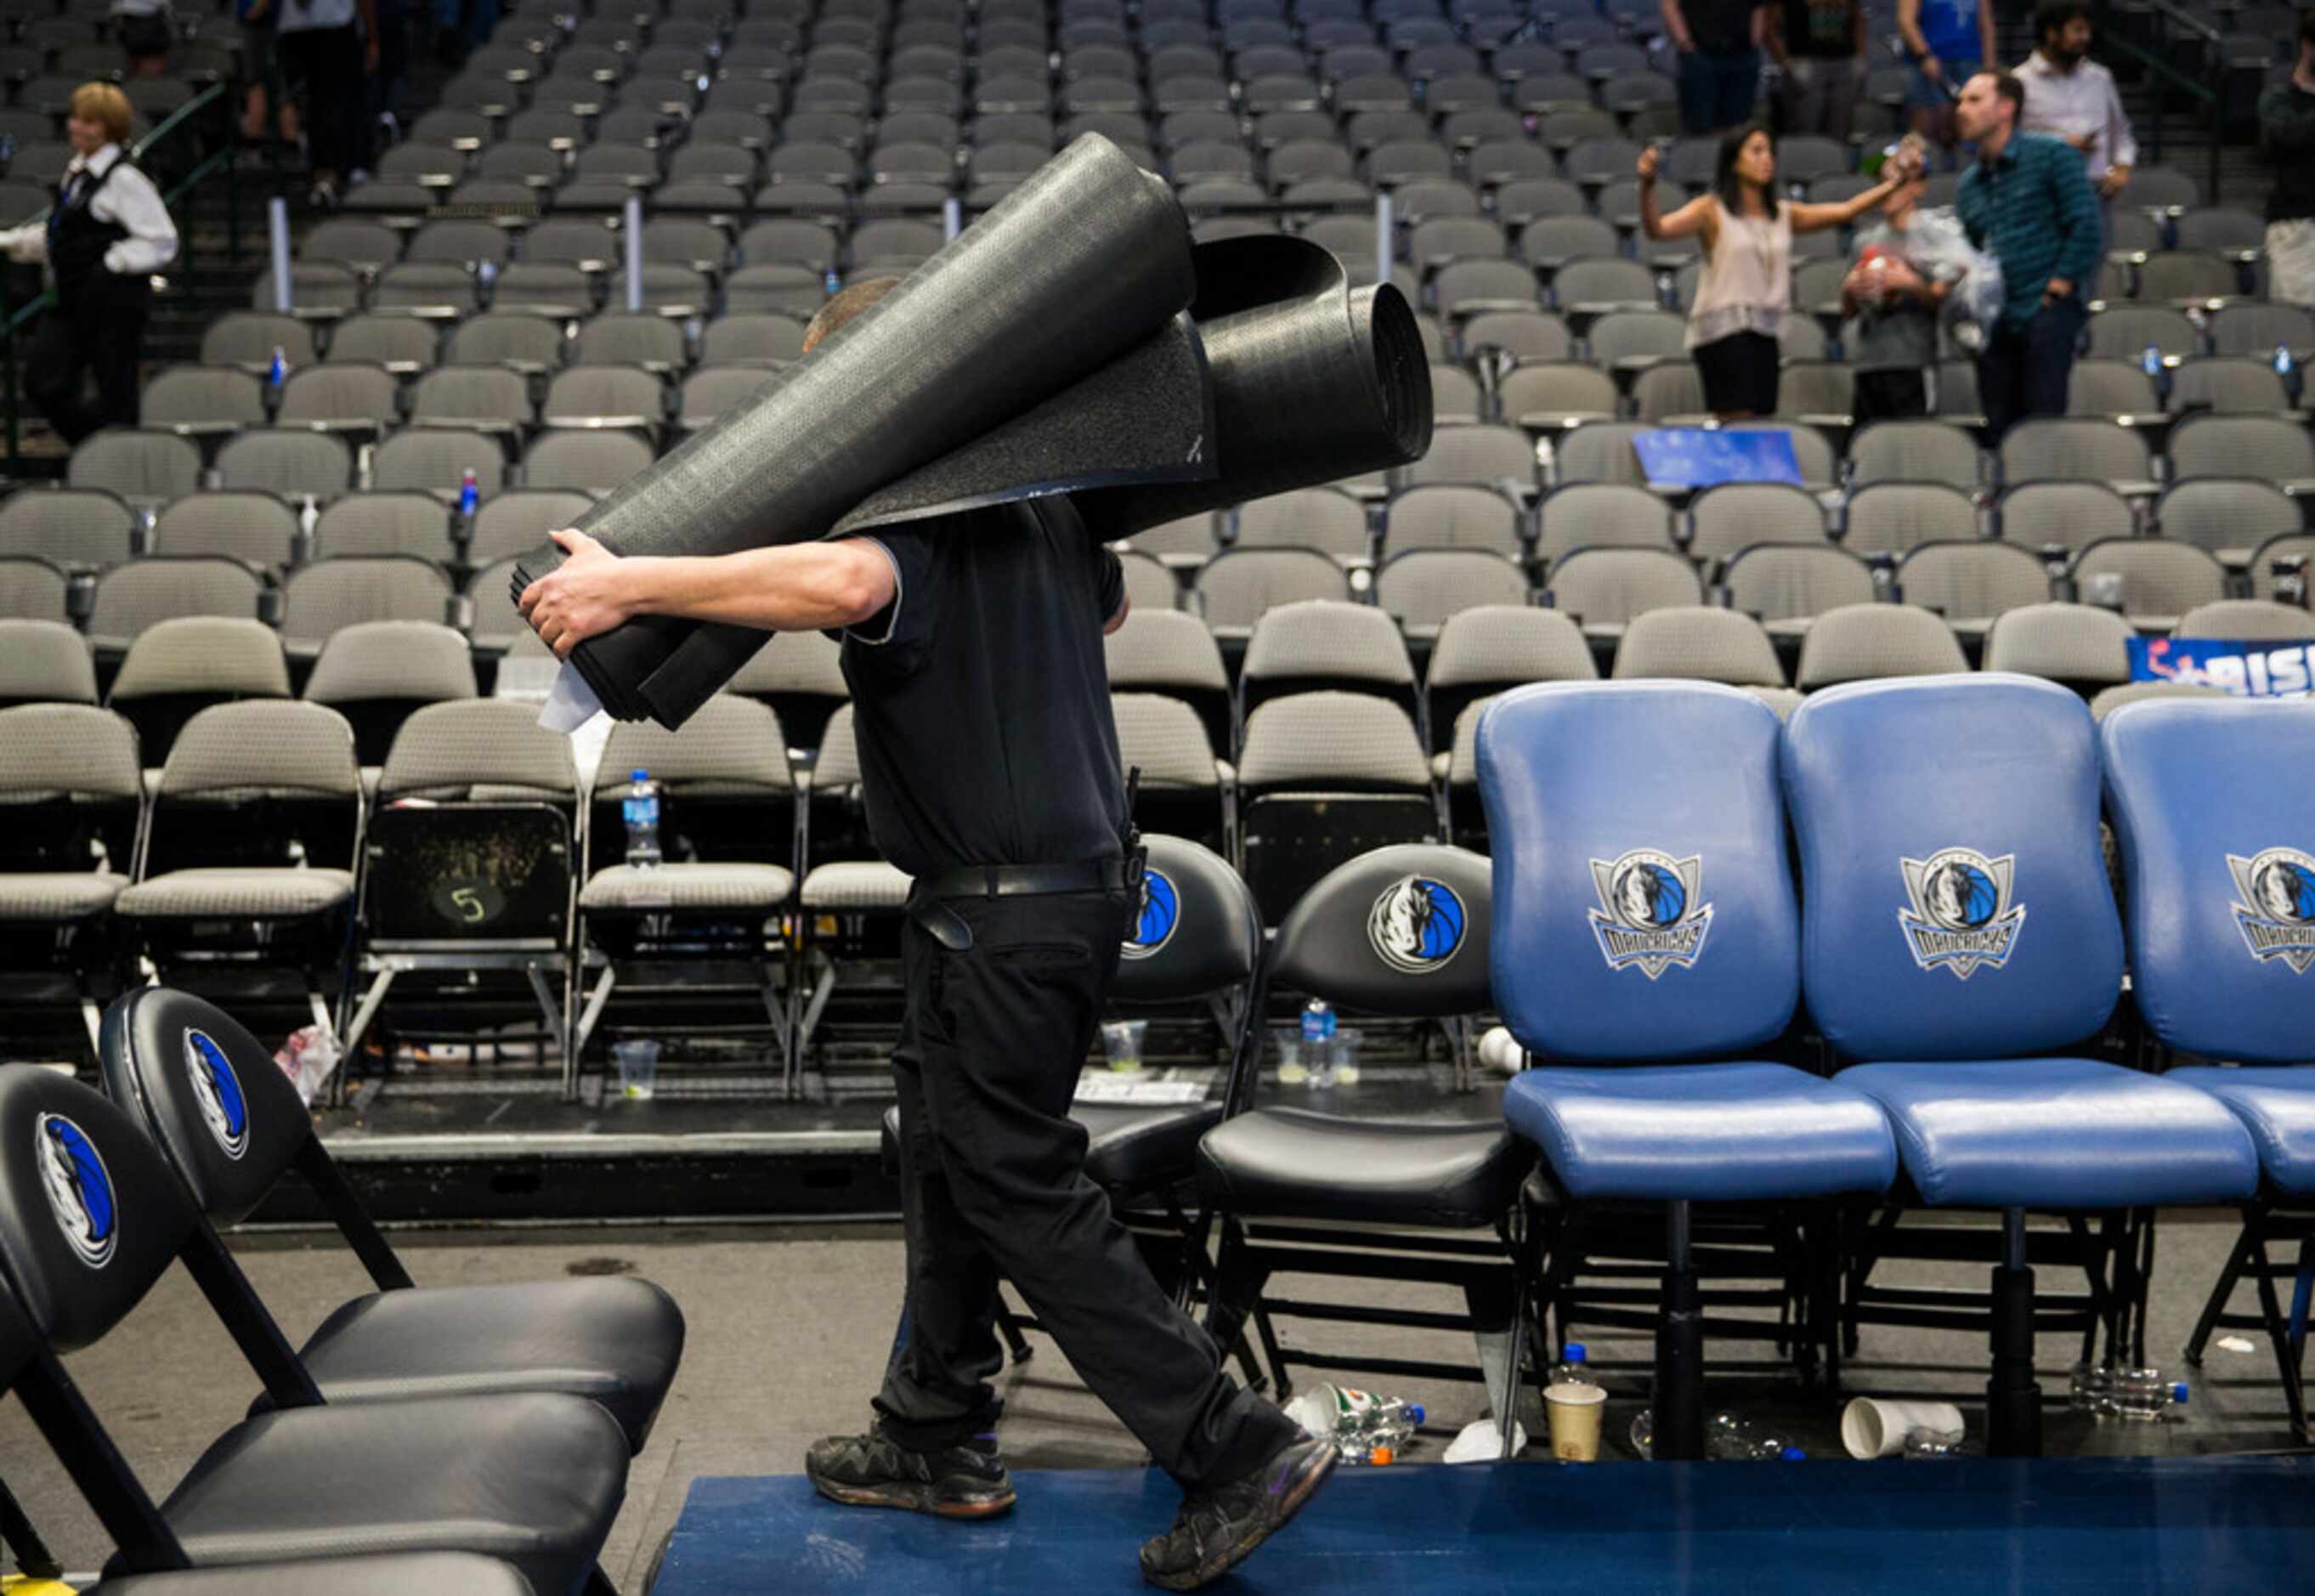 A worker removes rolled up carpets in front of the Mavs bench after the Dallas Mavericks...